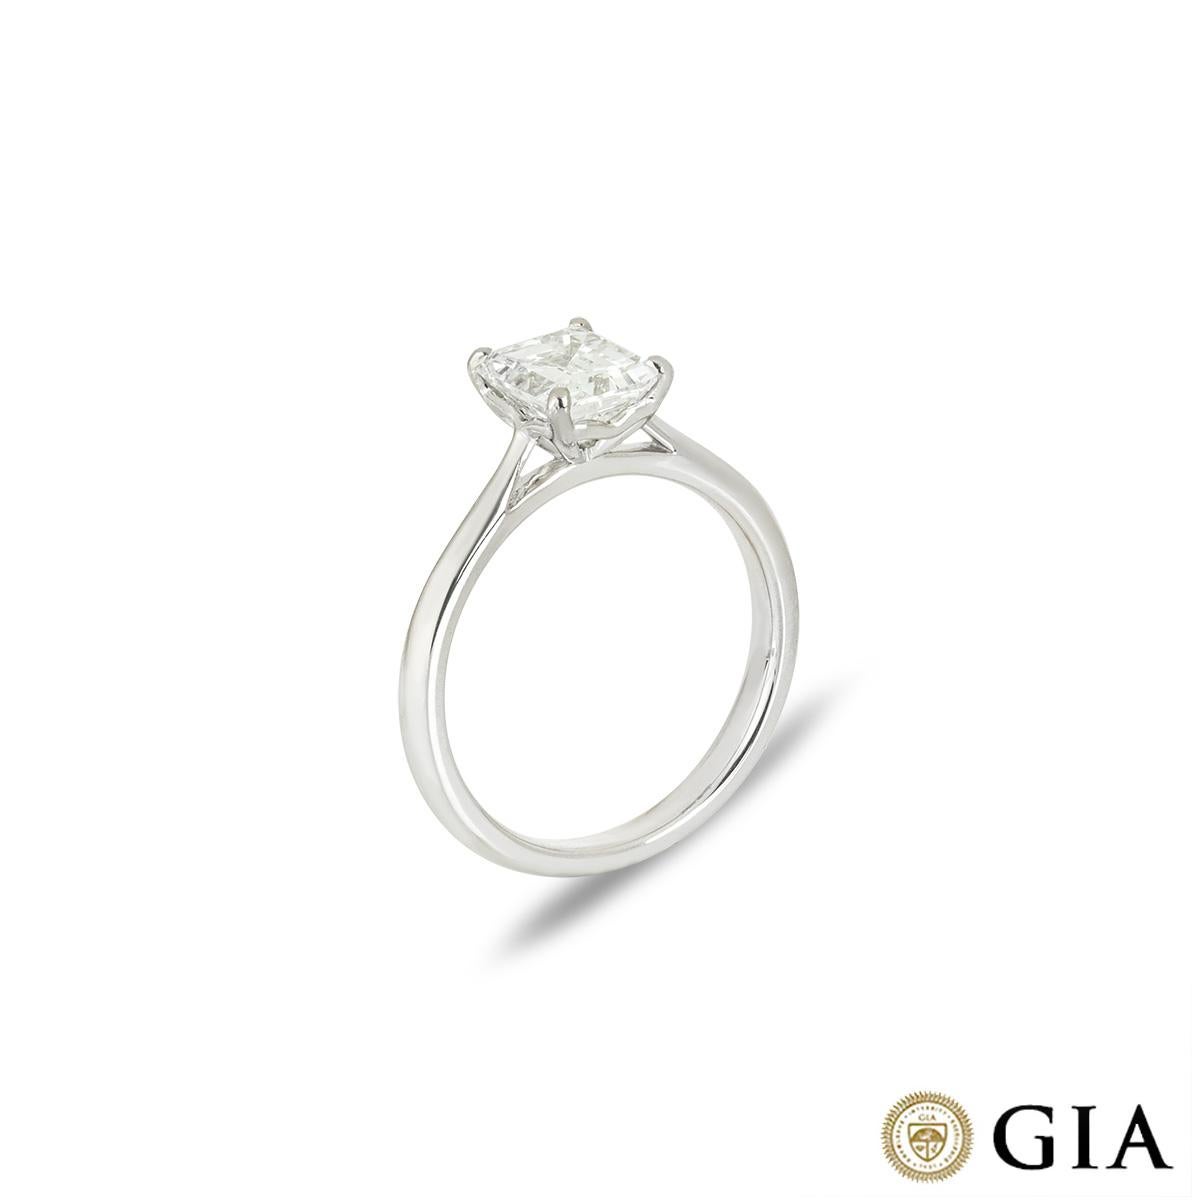 A stunning platinum diamond engagement ring. The solitaire features an emerald cut diamond set in a four prong mount weighing 1.51ct, E colour and VS2 clarity. The ring tapers from 1.5mm to 2.5mm, has a gross weight of 4.51 grams and is currently a